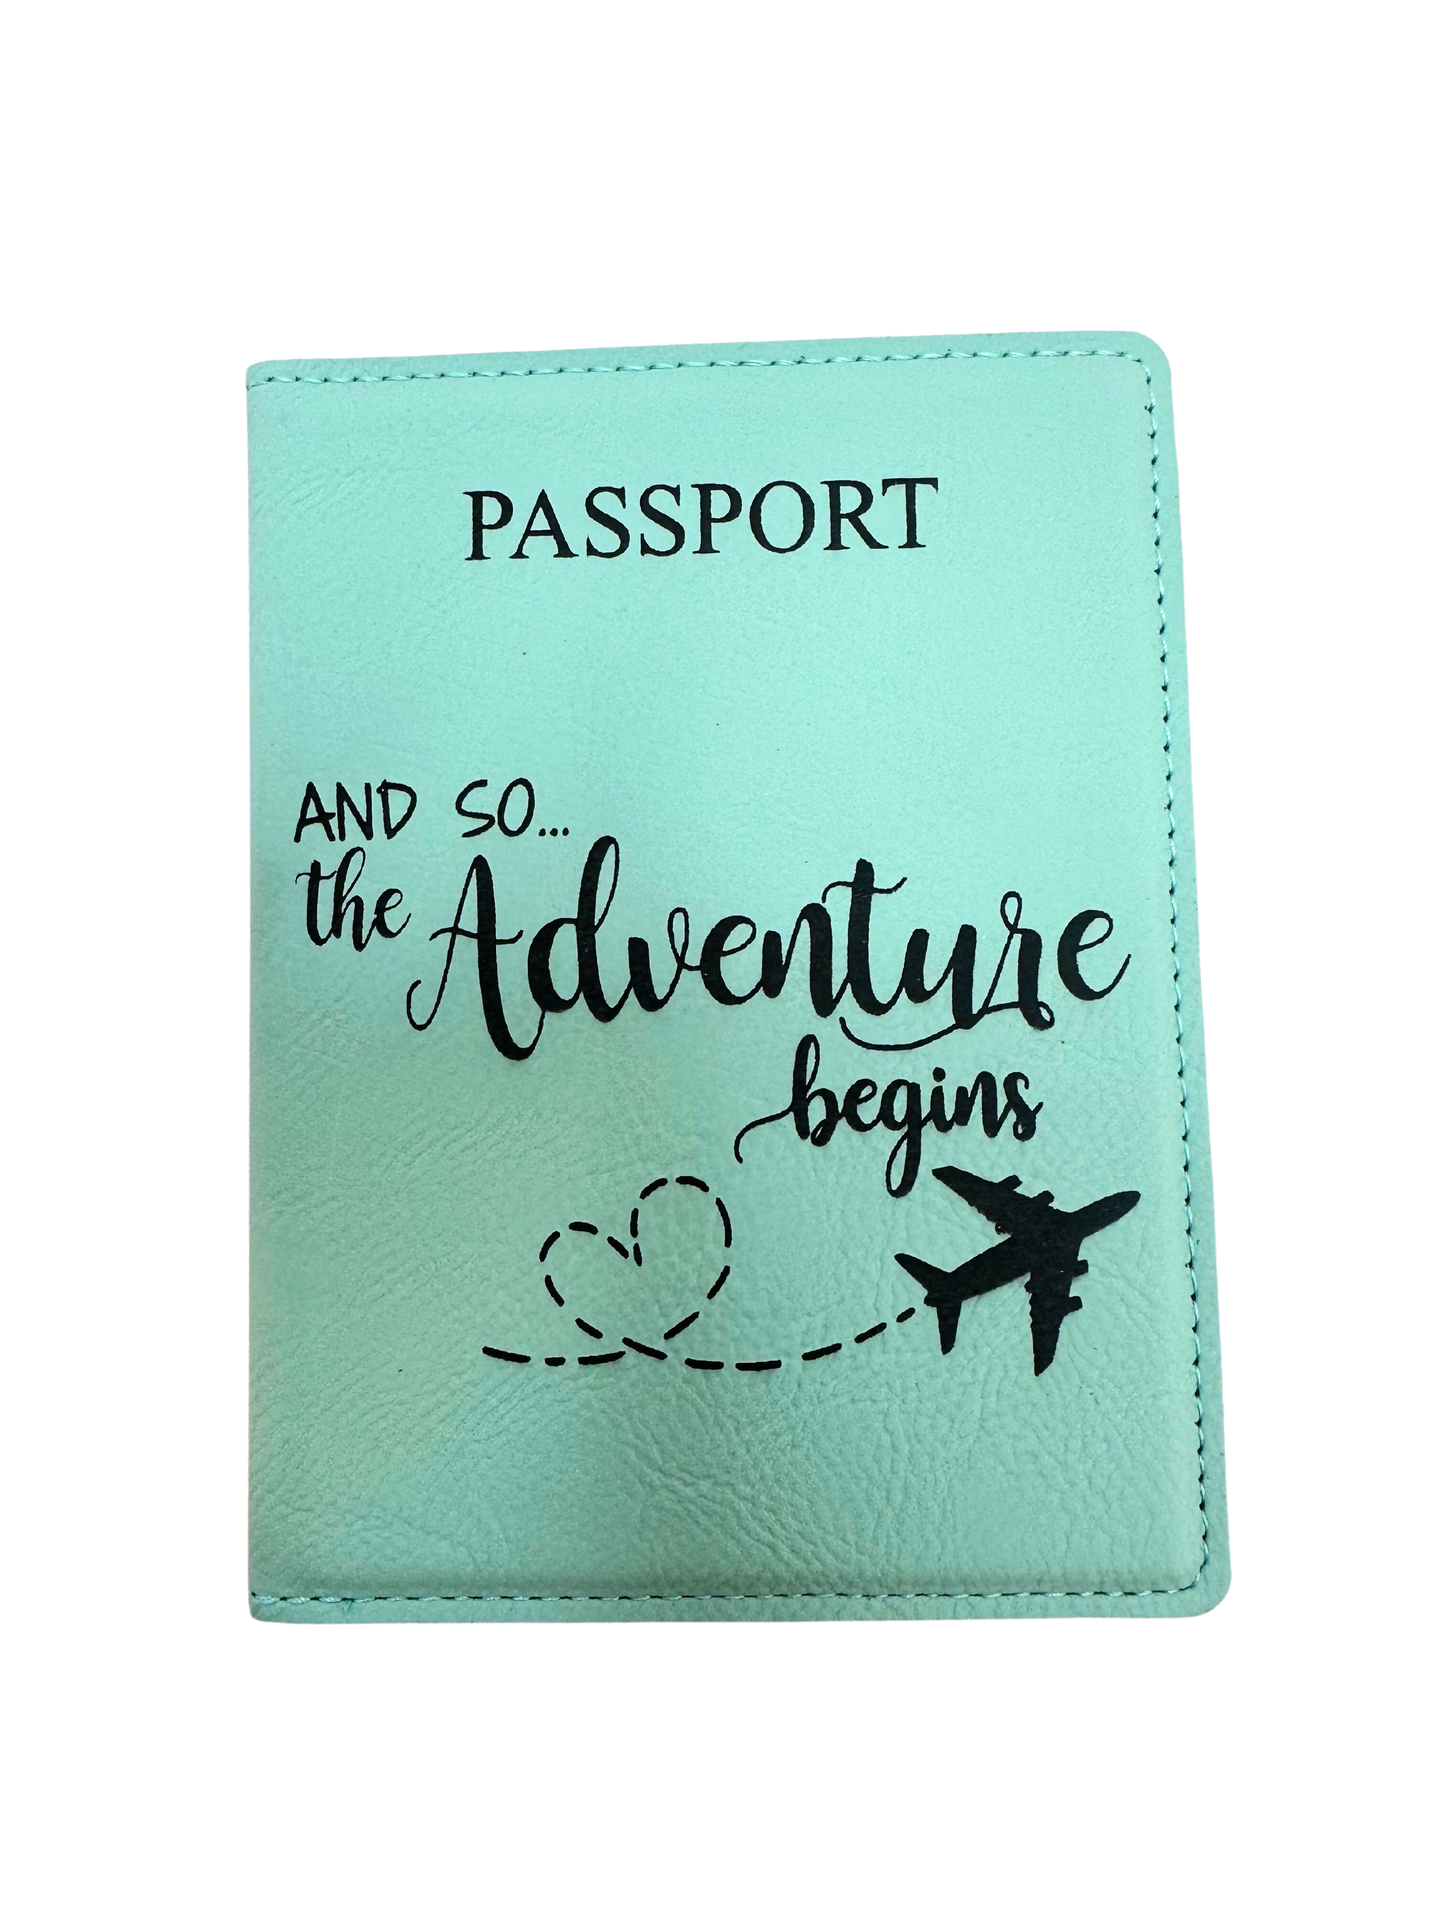 And so the adventure begins passport cover